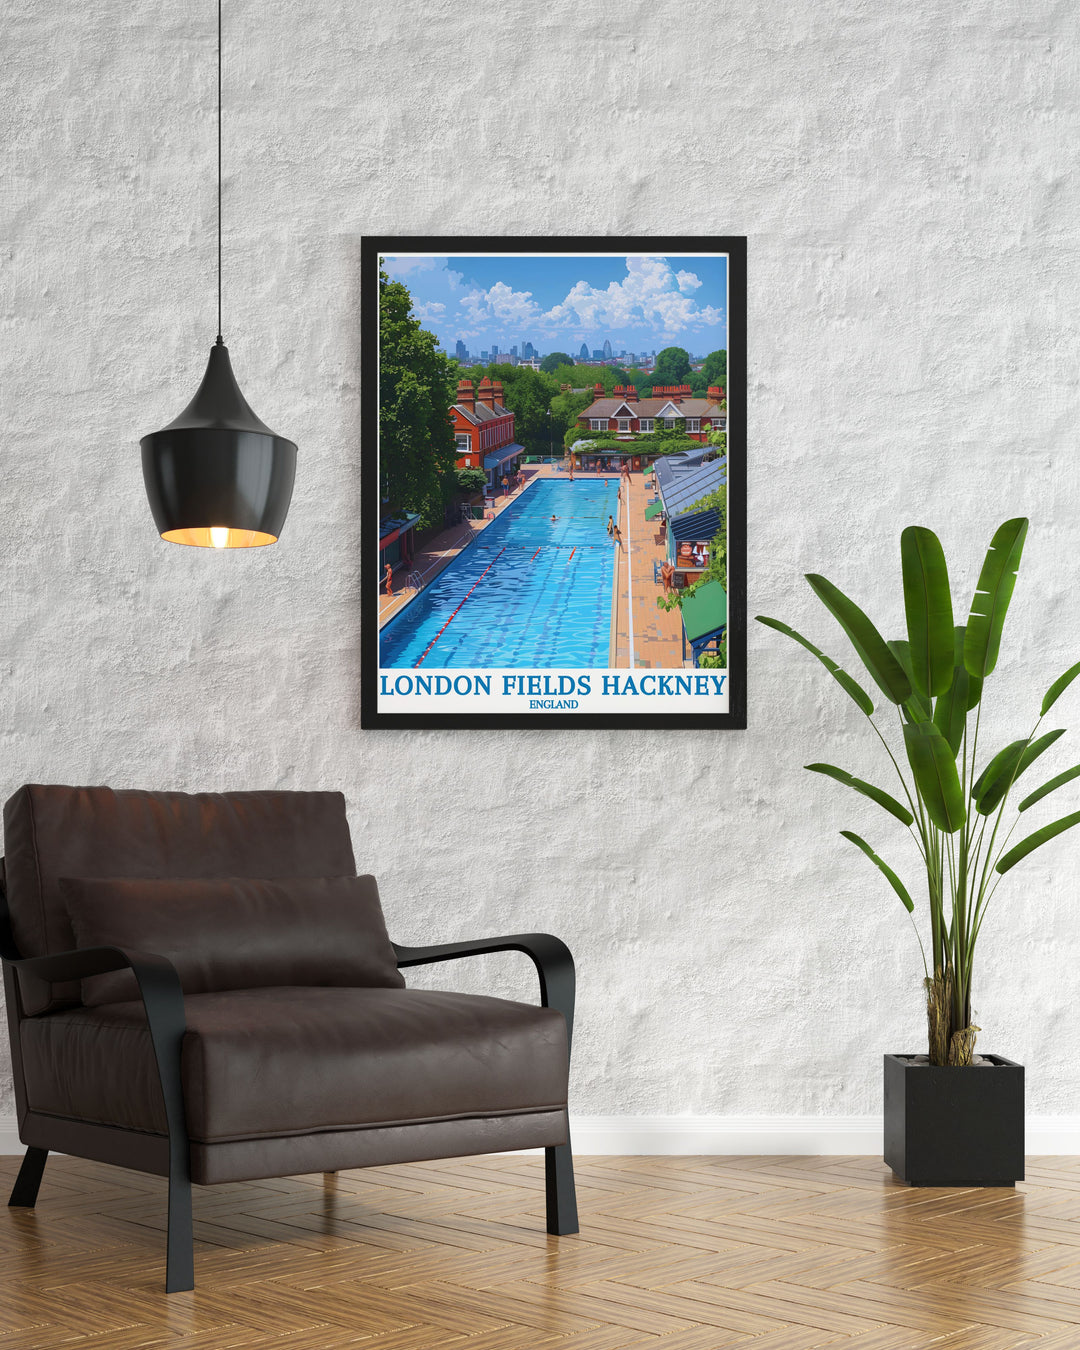 Featuring the picturesque London Fields Park, this poster offers a visual representation of one of Hackneys most beloved green spaces, ideal for outdoor enthusiasts and families.